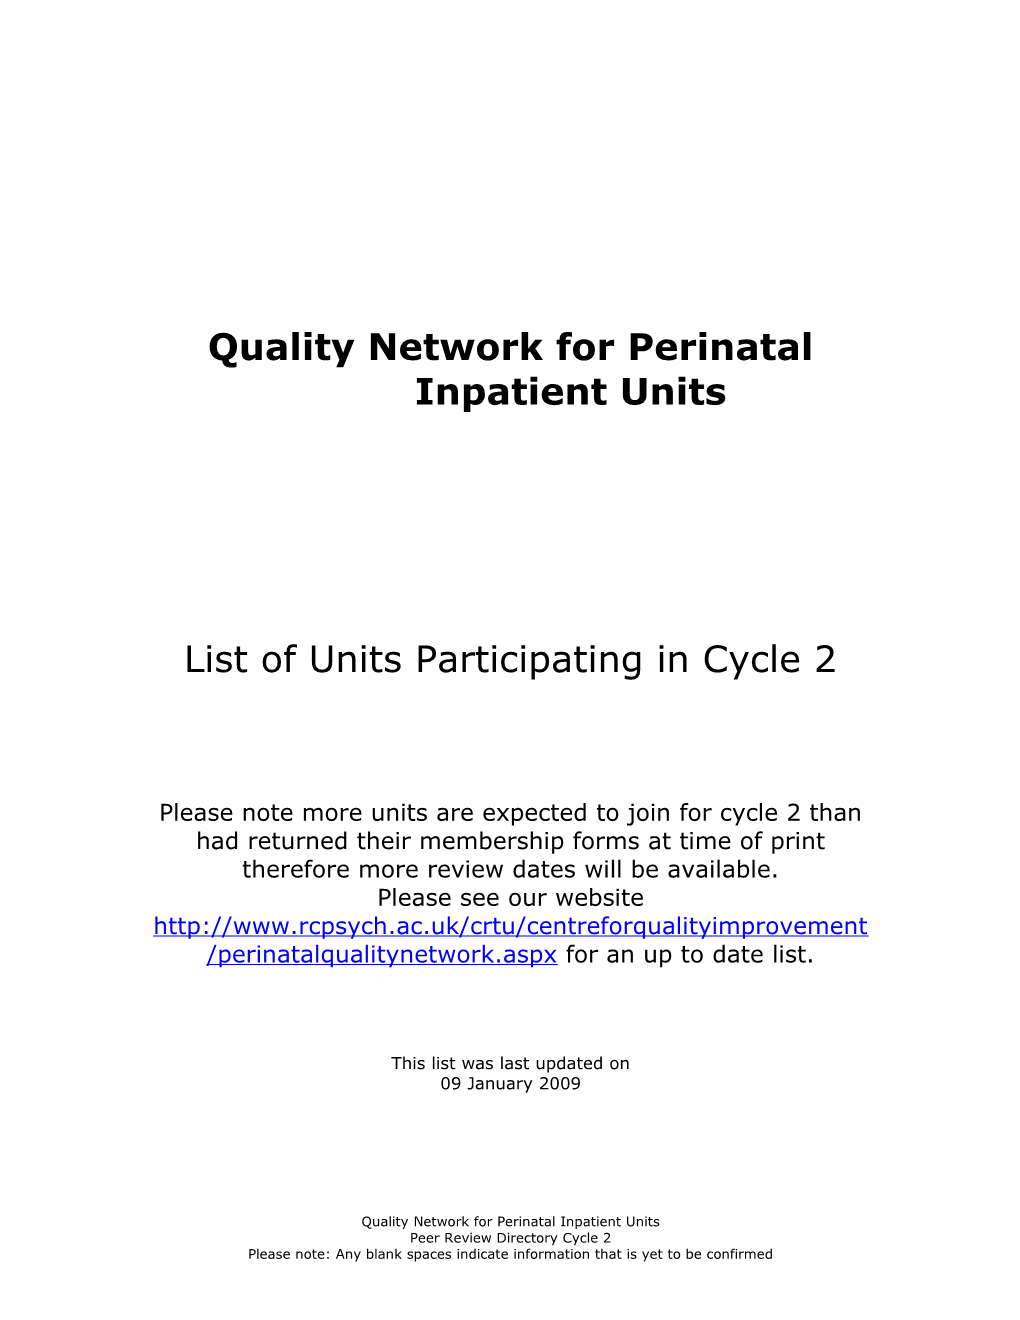 Quality Network for Perinatal Inpatient Units